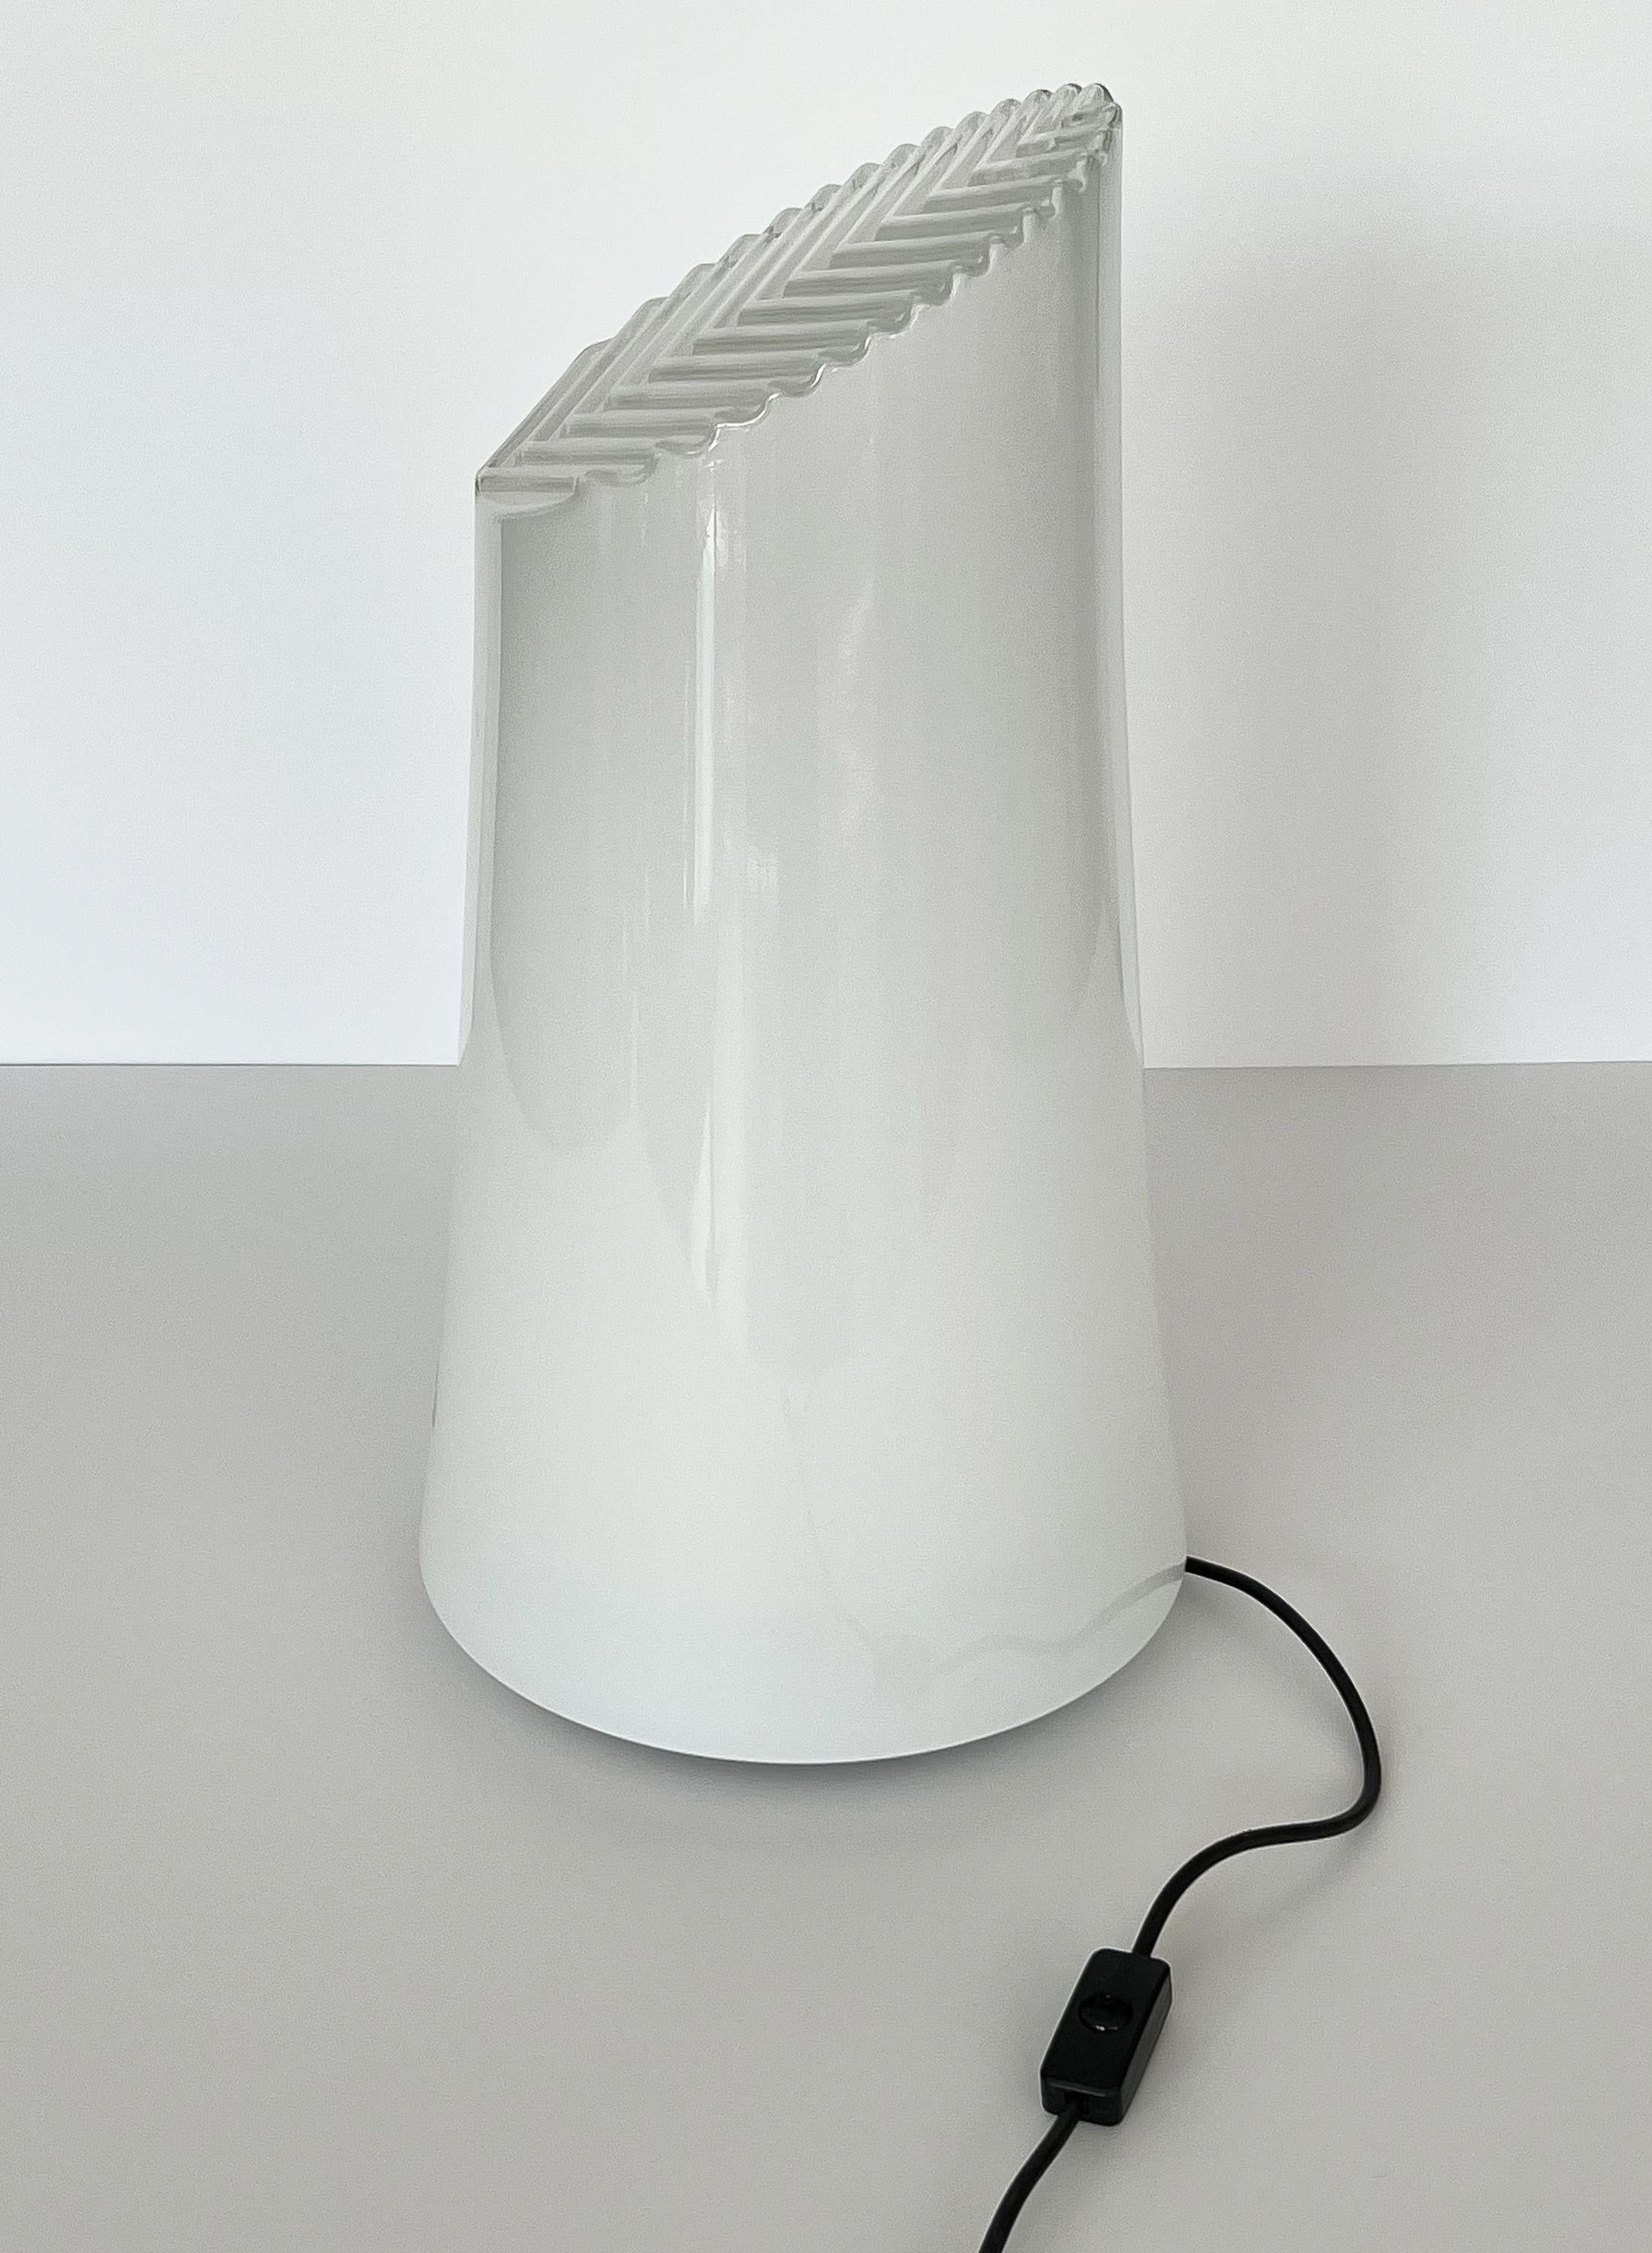  Sculptural Italian White Cased Glass Table Lamp by ITRE 2